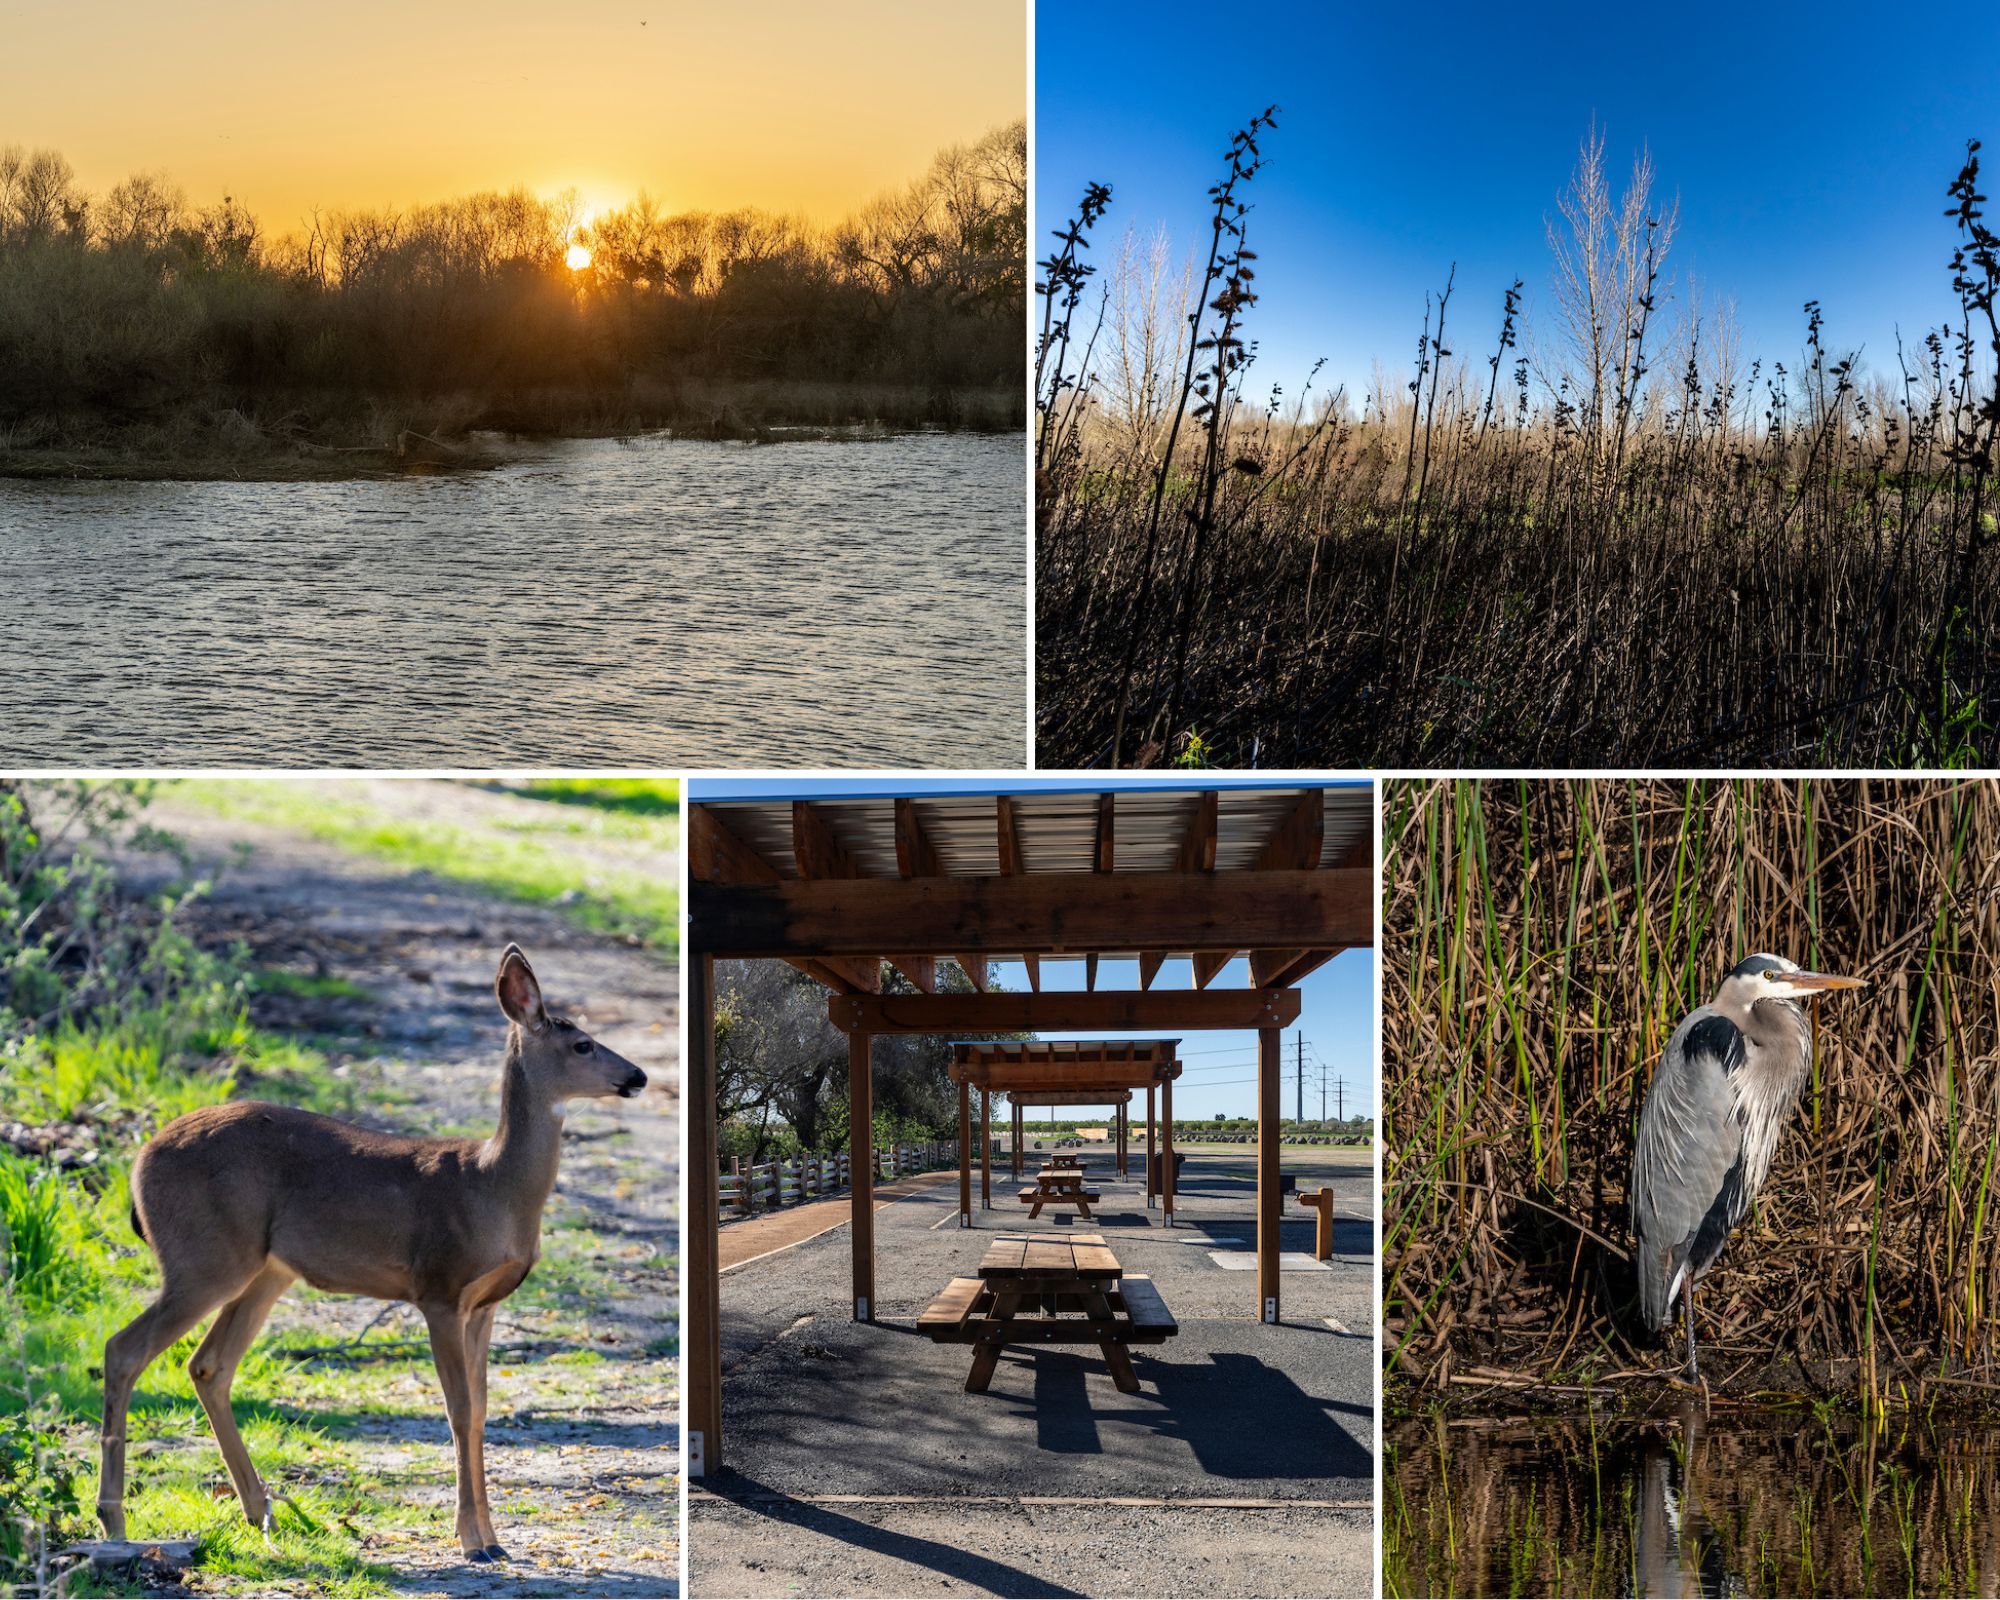 Images of Dos Rios, the newest state park in the San Joaquin Valley. Photos from California State Parks.